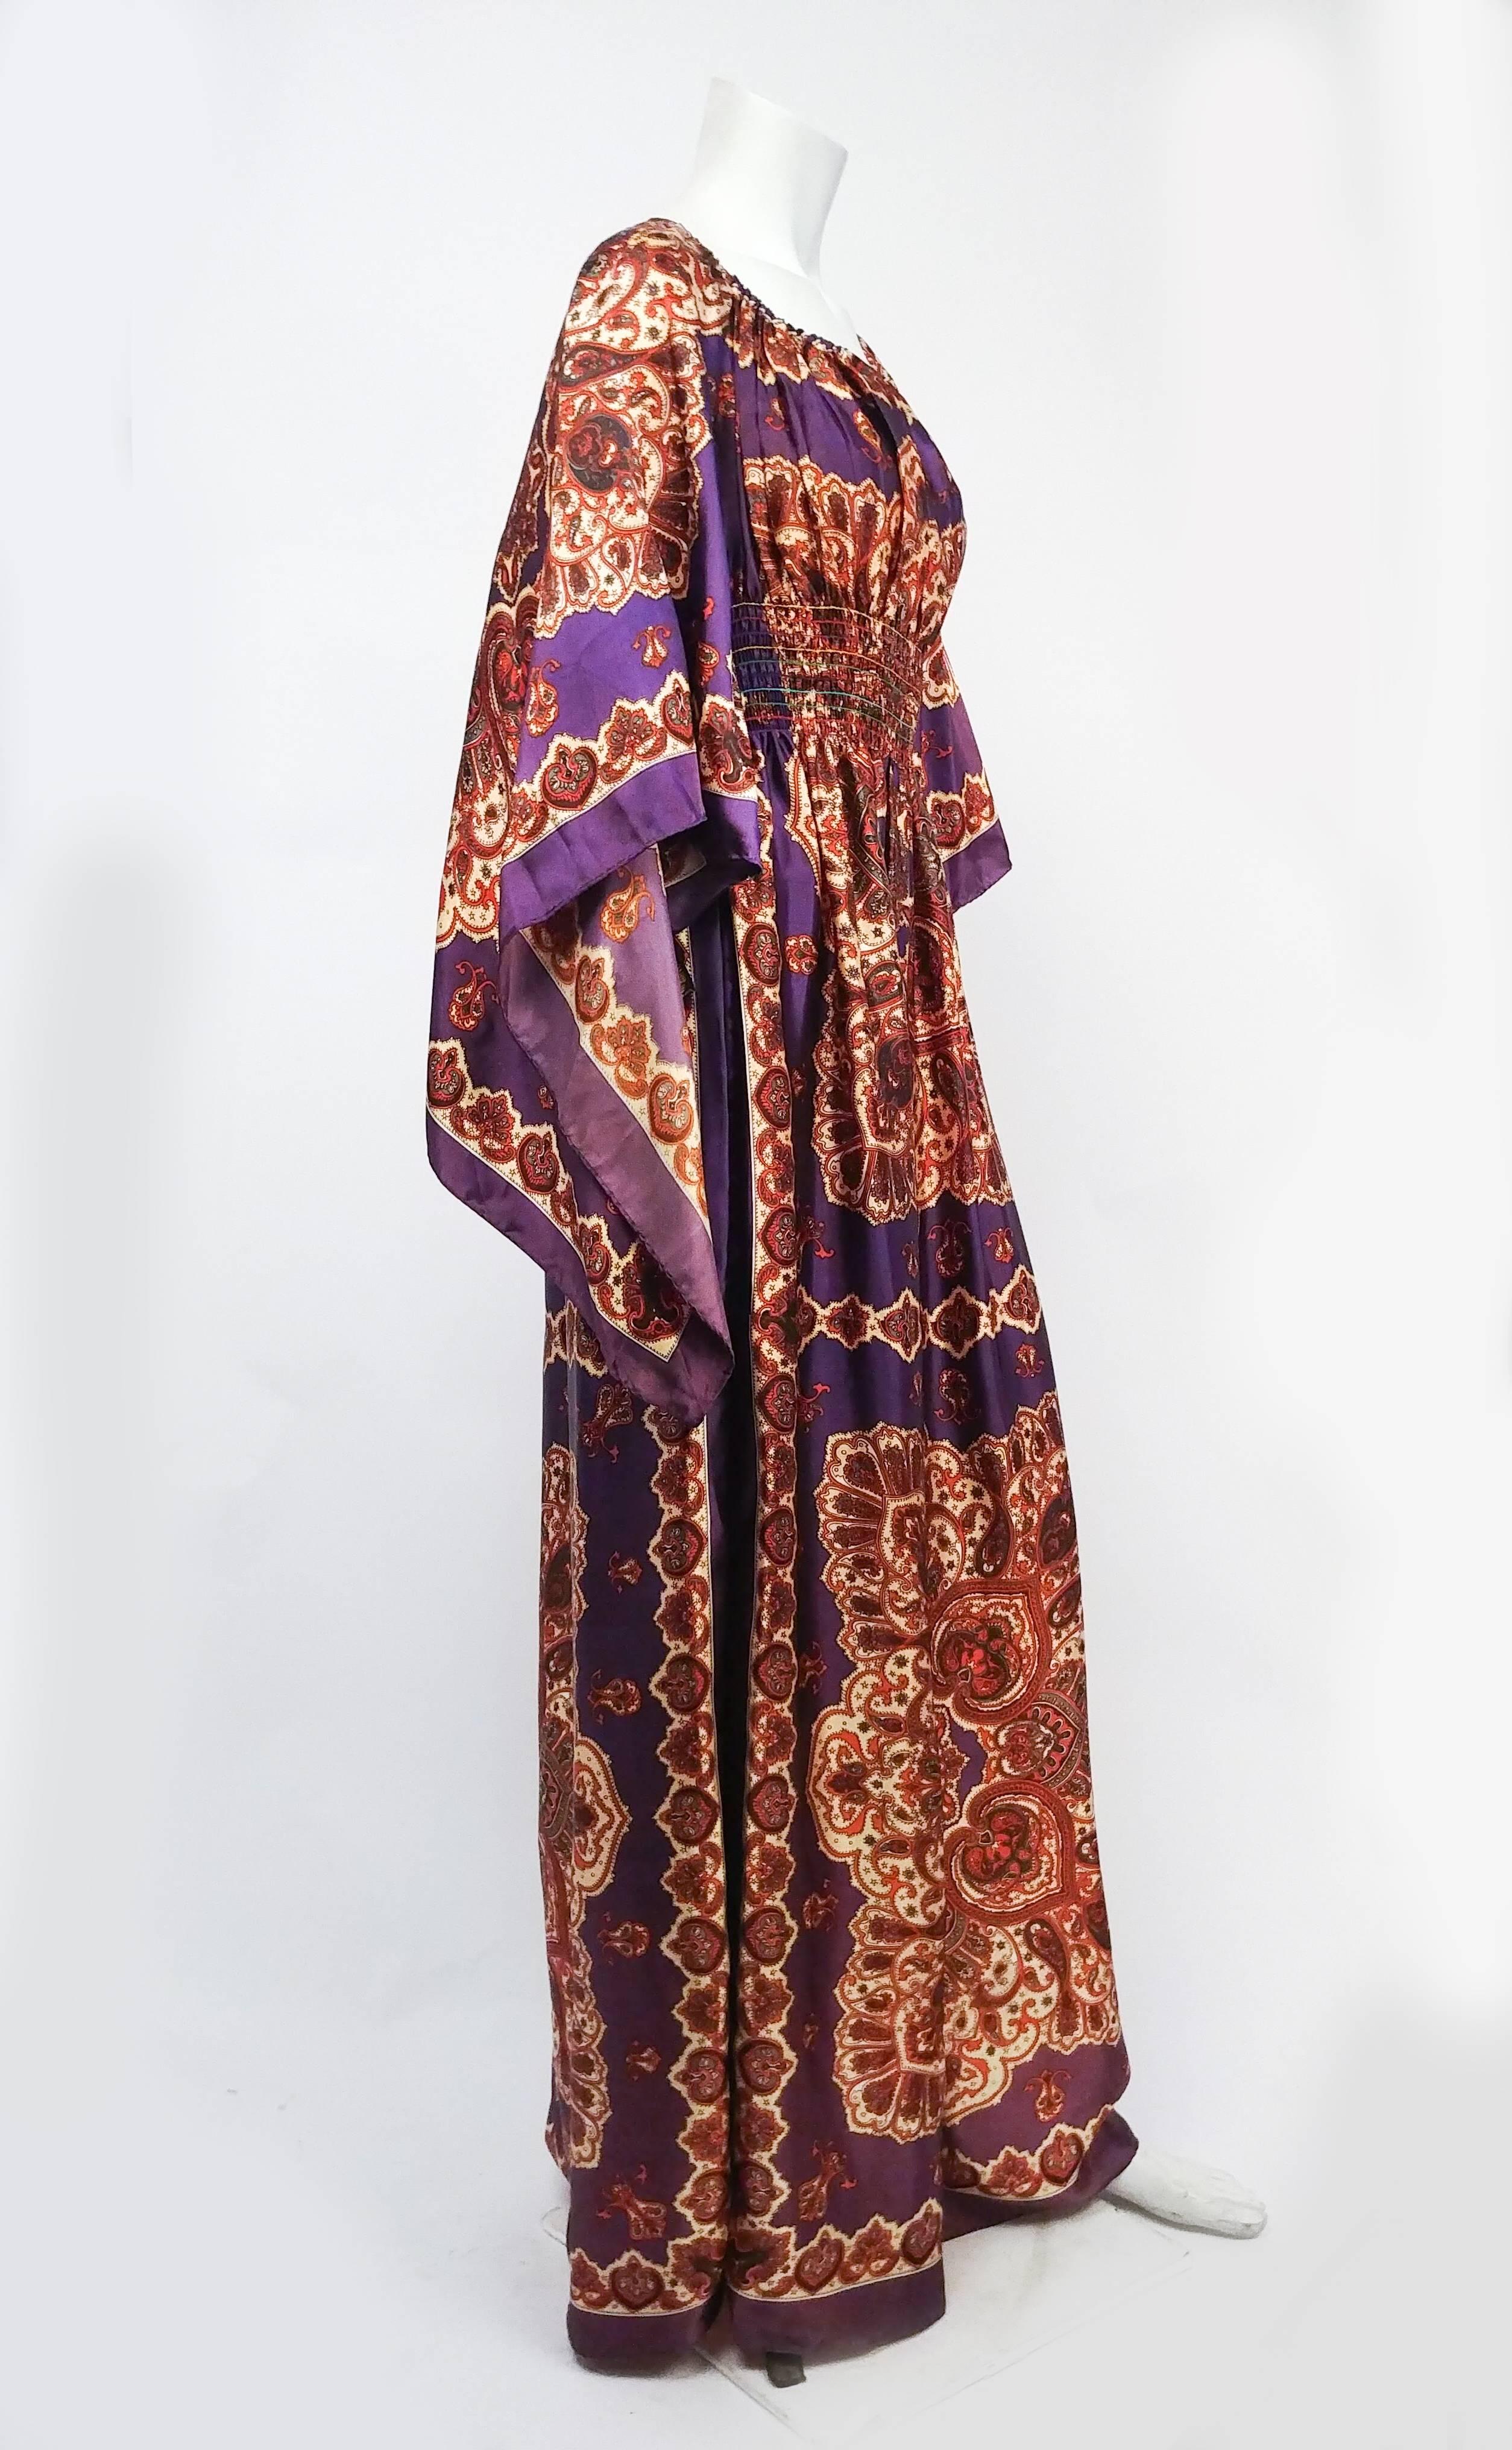 1970s Purple Paisley Handkerchief Dress. Handmade hippie 1970s dress out of several scarves, part of the wearable art movement of the 1970s. Tags of scarves still attached. 